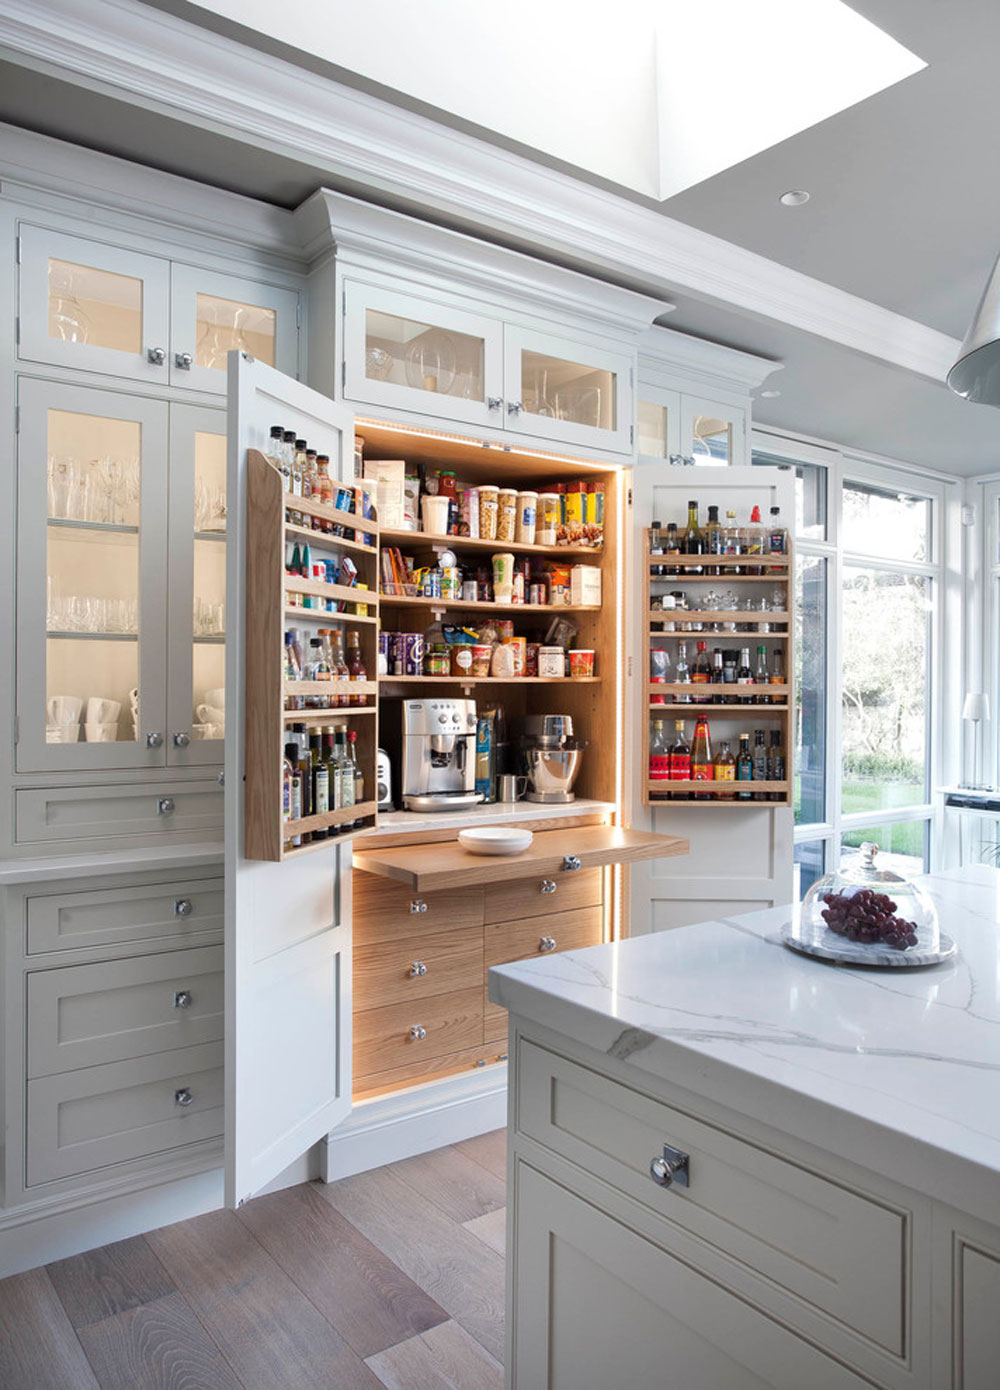 Ideas for pantry cabinets by Kitchen-Larder-by-Woodale: Ideas for shelves and storage for your kitchen